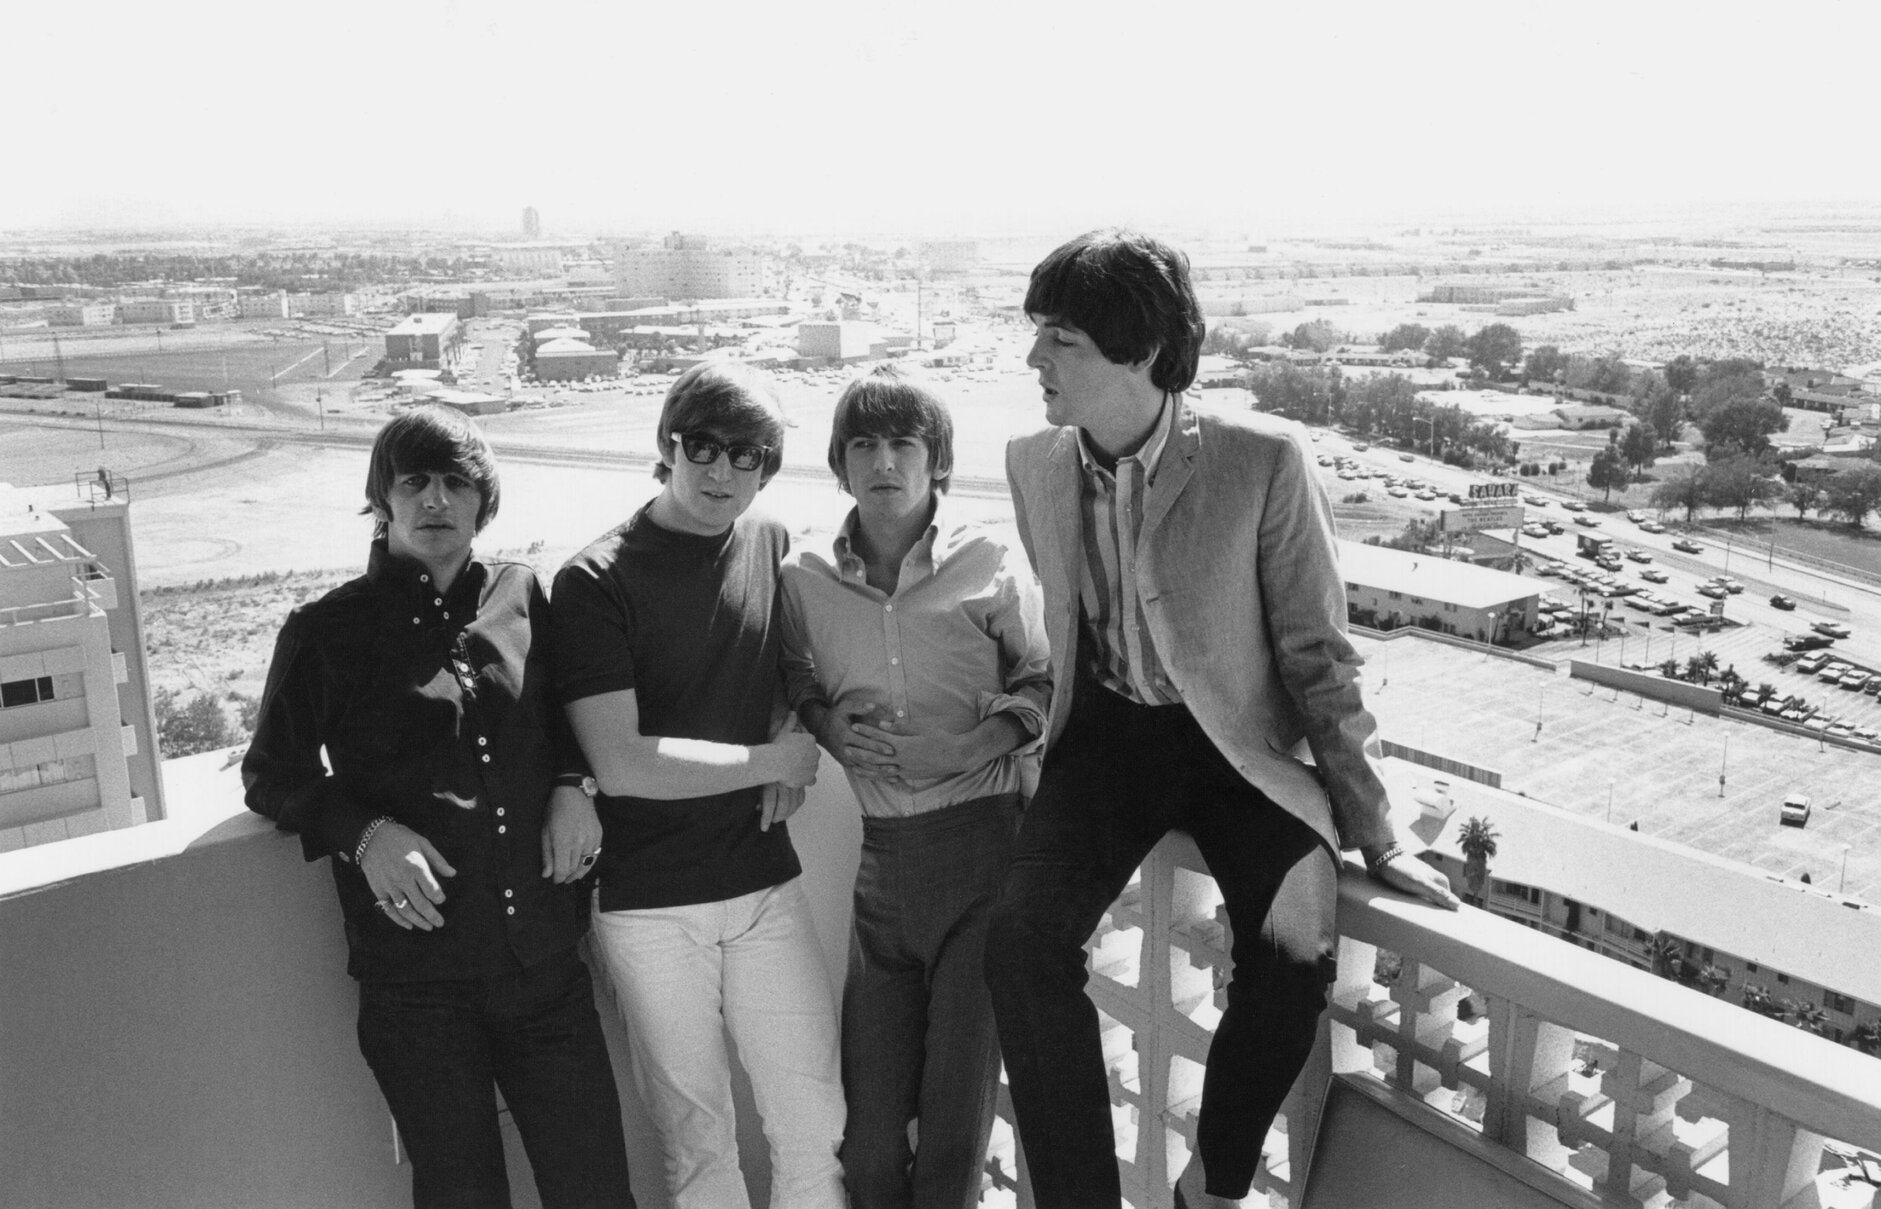 The Beatles on a hotel balcony during their tour of America in 1964.